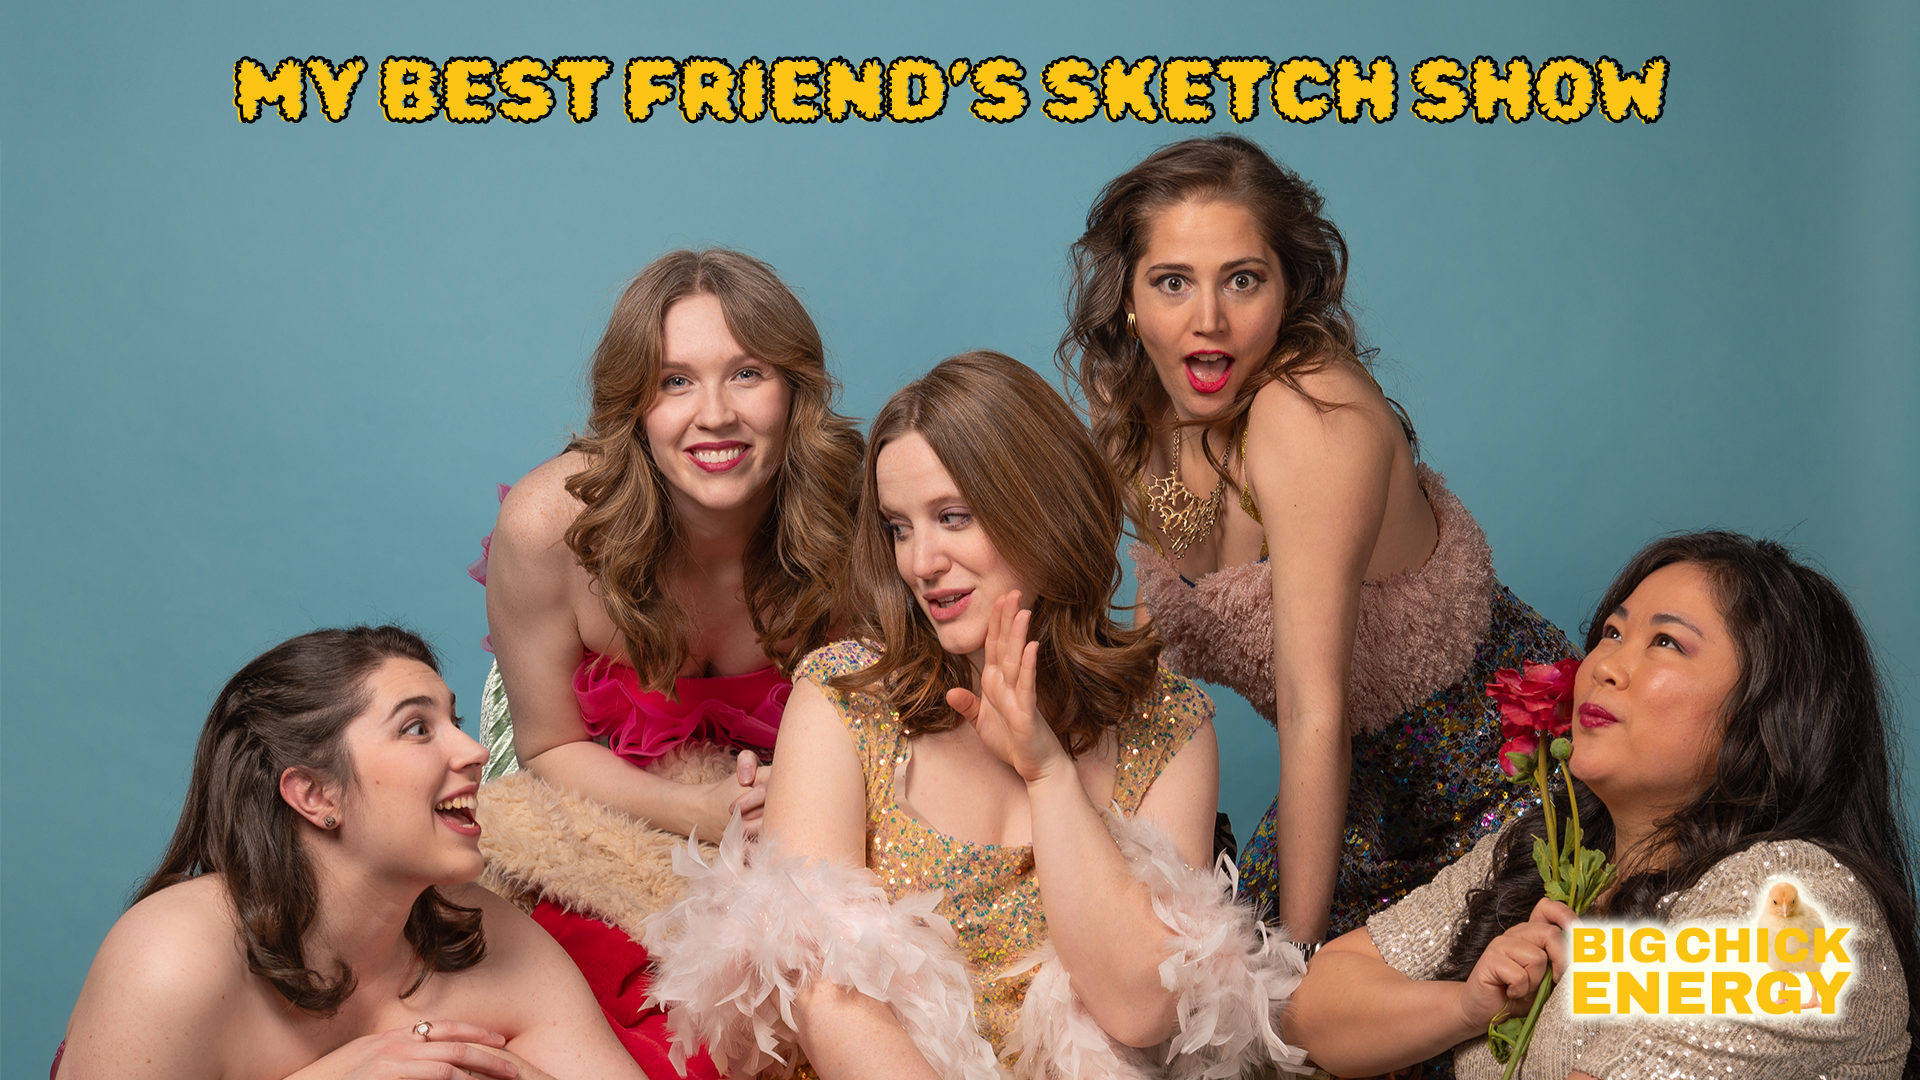 Big Chick Energy's My Best Friend's Sketch Show From left to right, Julia Jones, Alicia Carrick, Sam Sexton, Emily Decloux, Jo Anne Tacorda. All five chicks are wearing maximalist outfits with glitter and fur.